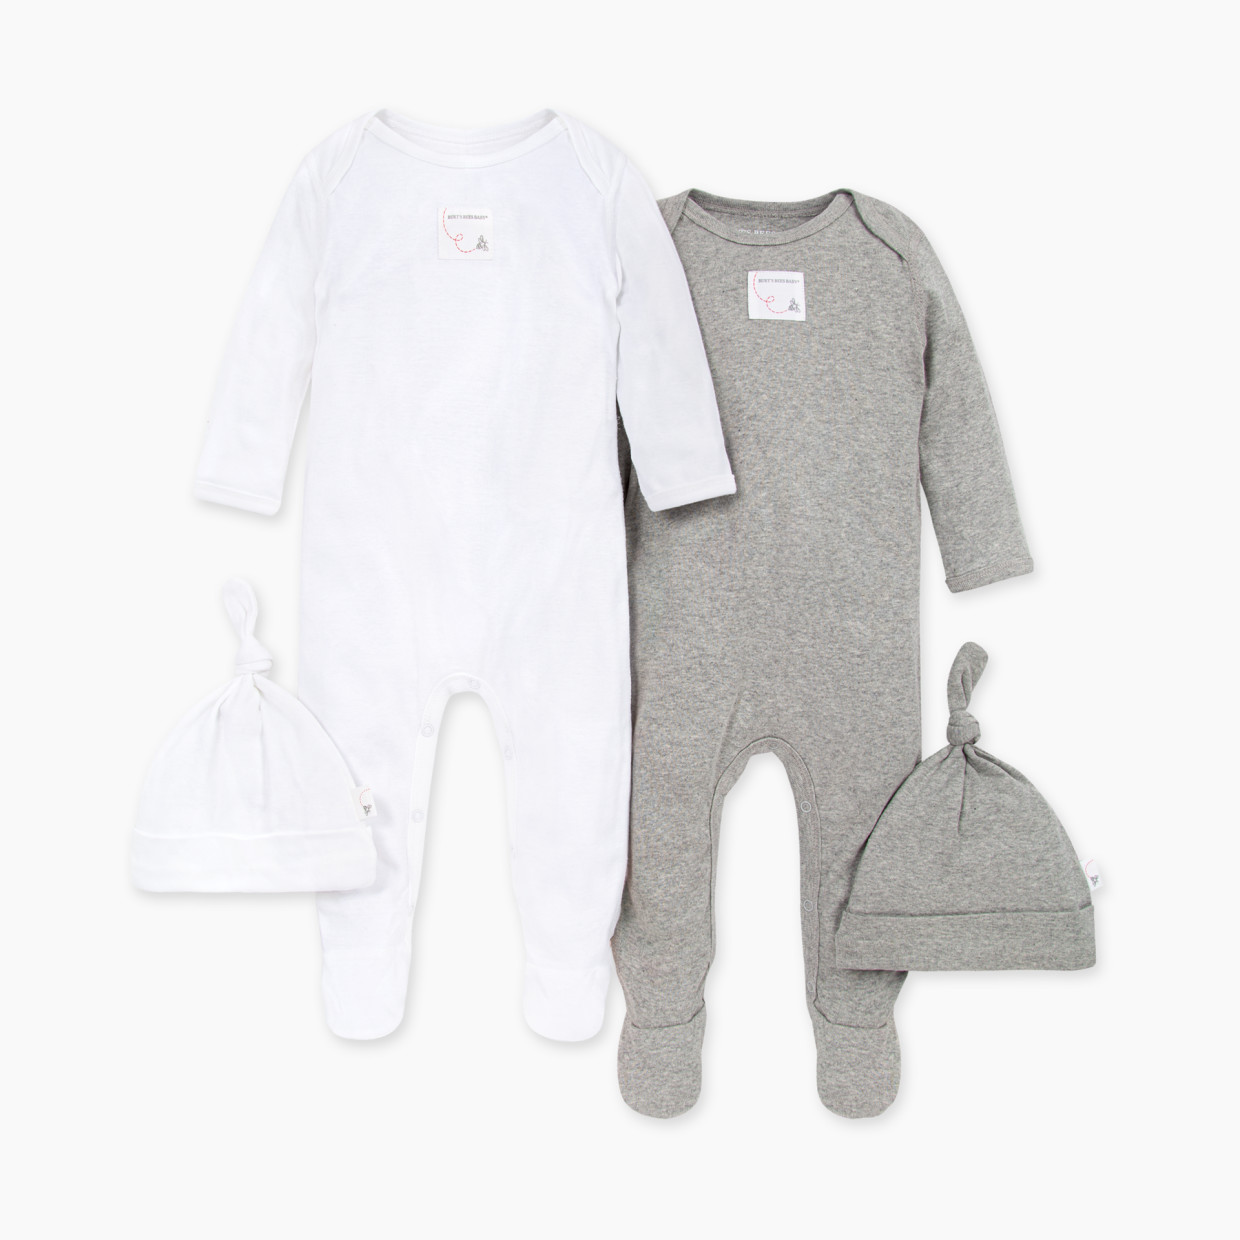 Burt's Bees Baby Organic Footed Coverall & Knot Top Hat (2 Pack) - Heather Grey/Cloud, 0-3 Months.